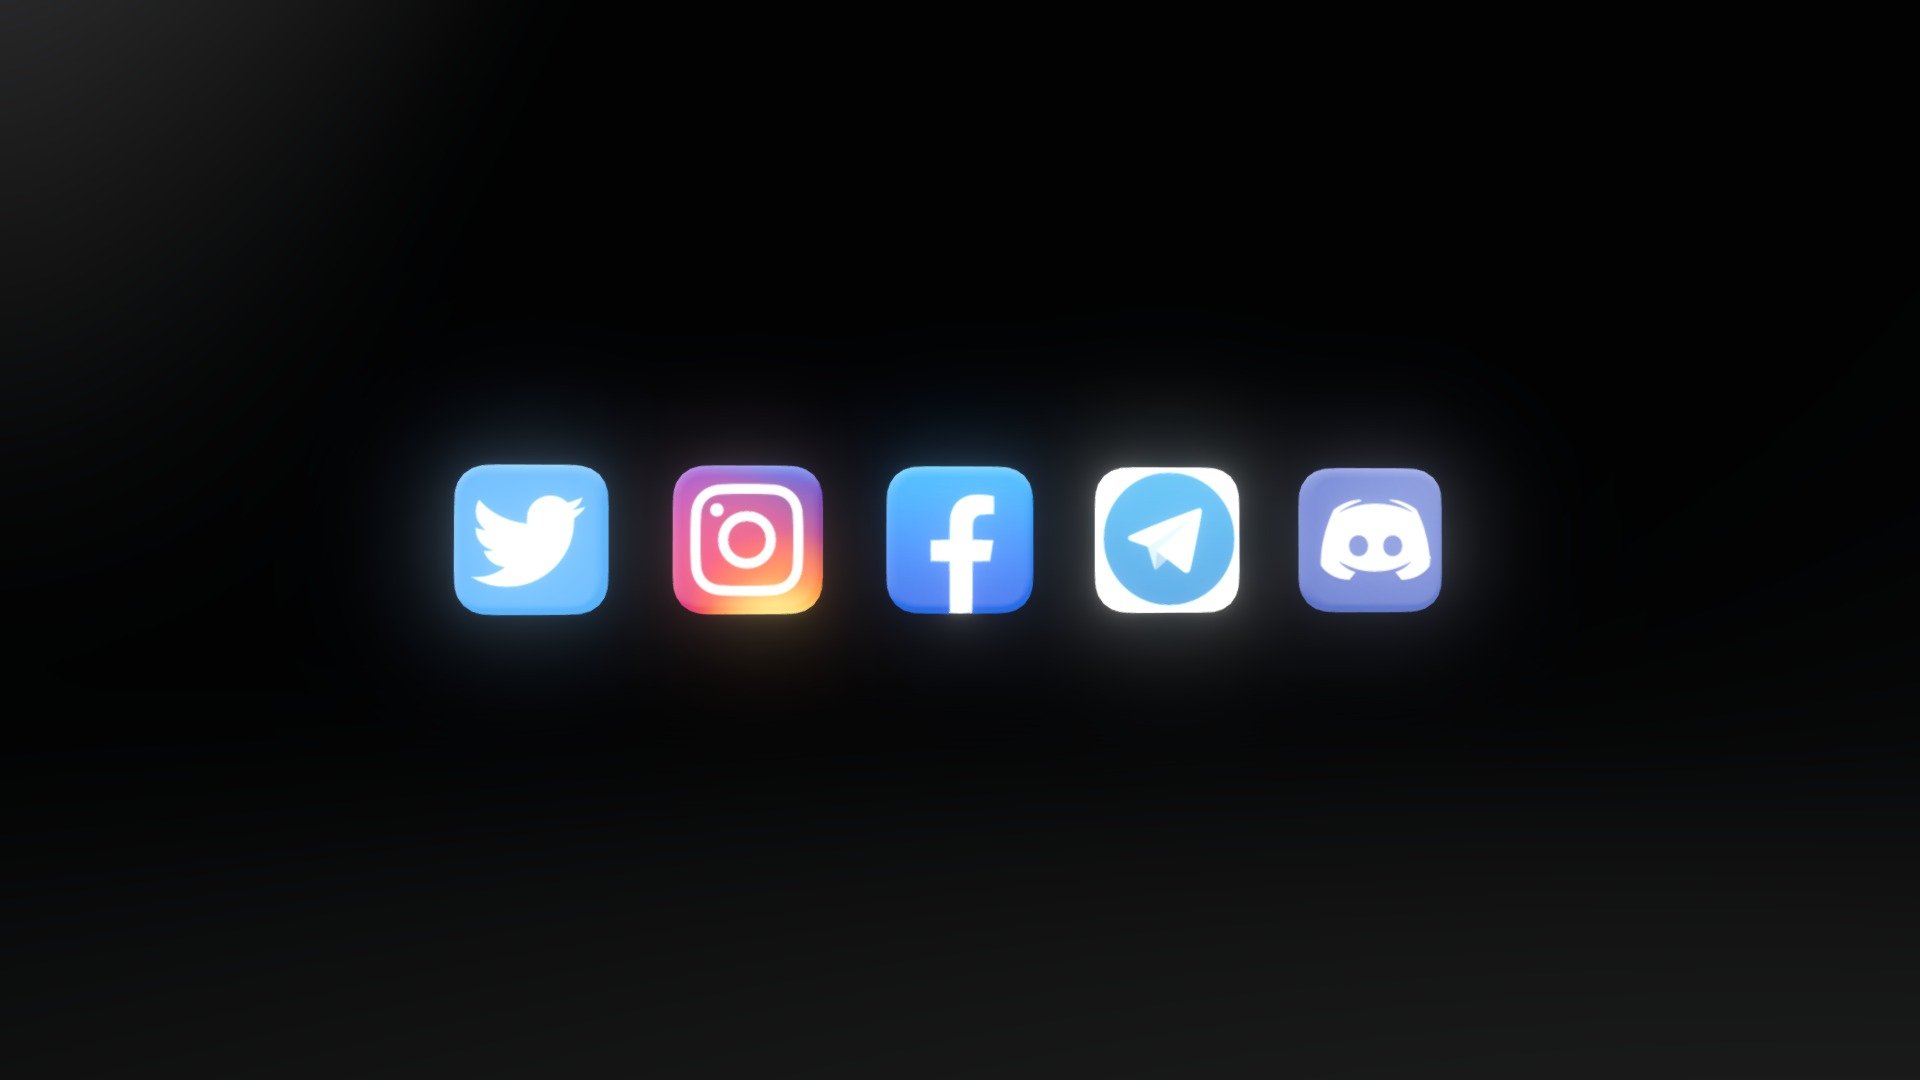 Social Media Icons curated for real time. Perfect for metaverse or 3D galleries like spatial.io. If you like you can purchase them or ask for more like these 3d model